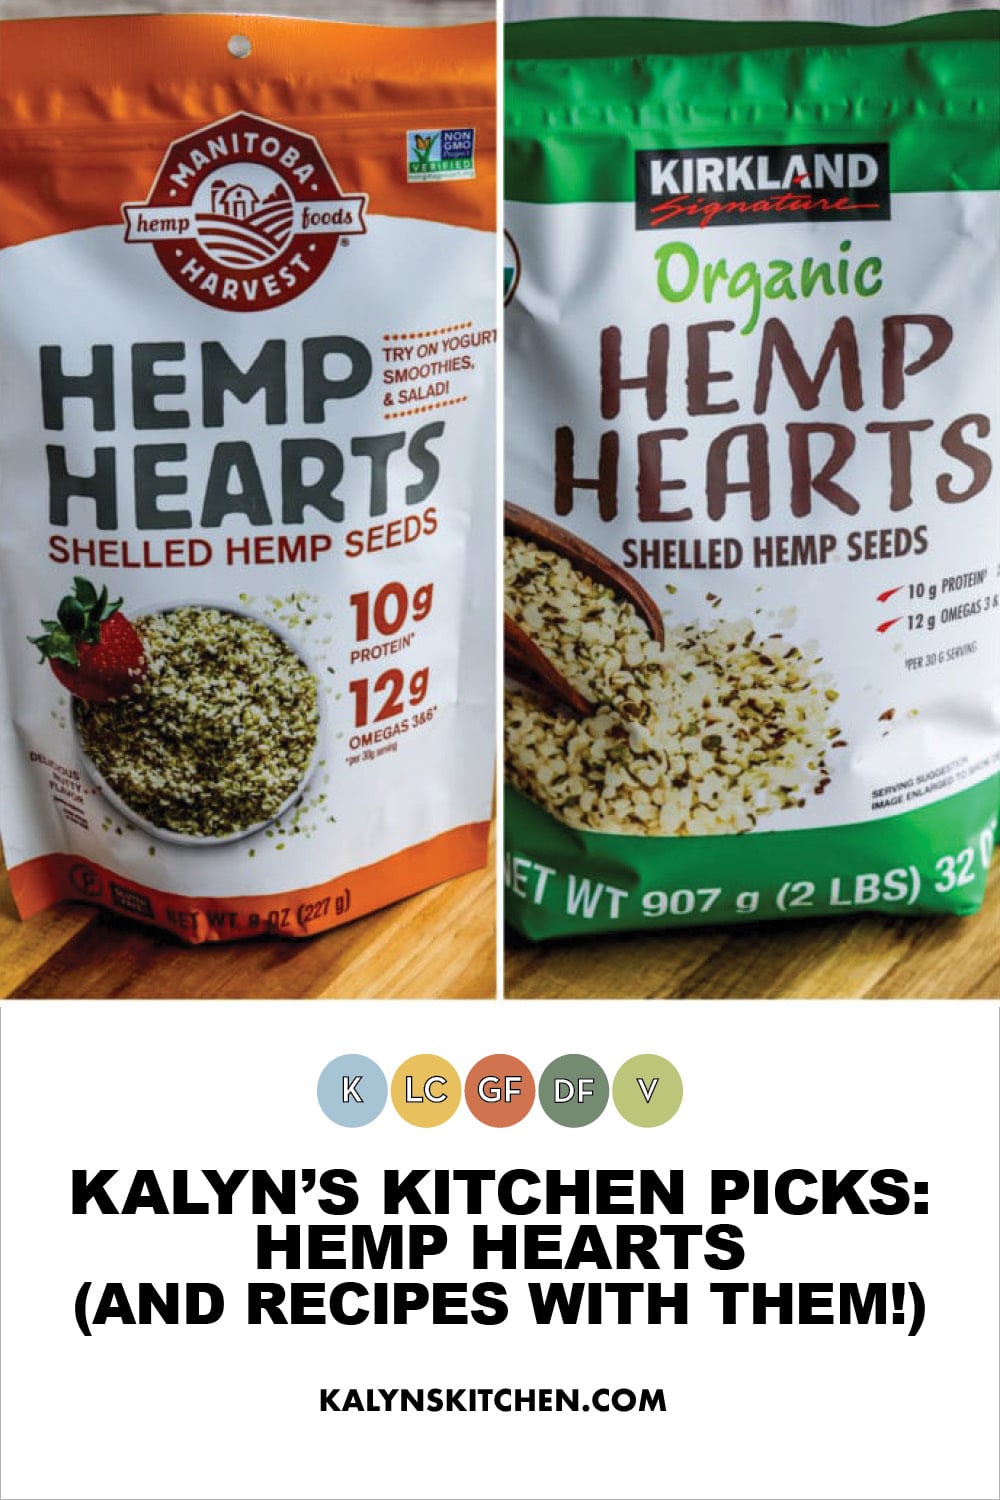 Pinterest image of Kalyn's Kitchen Picks: Hemp Hearts (and recipes with them!)